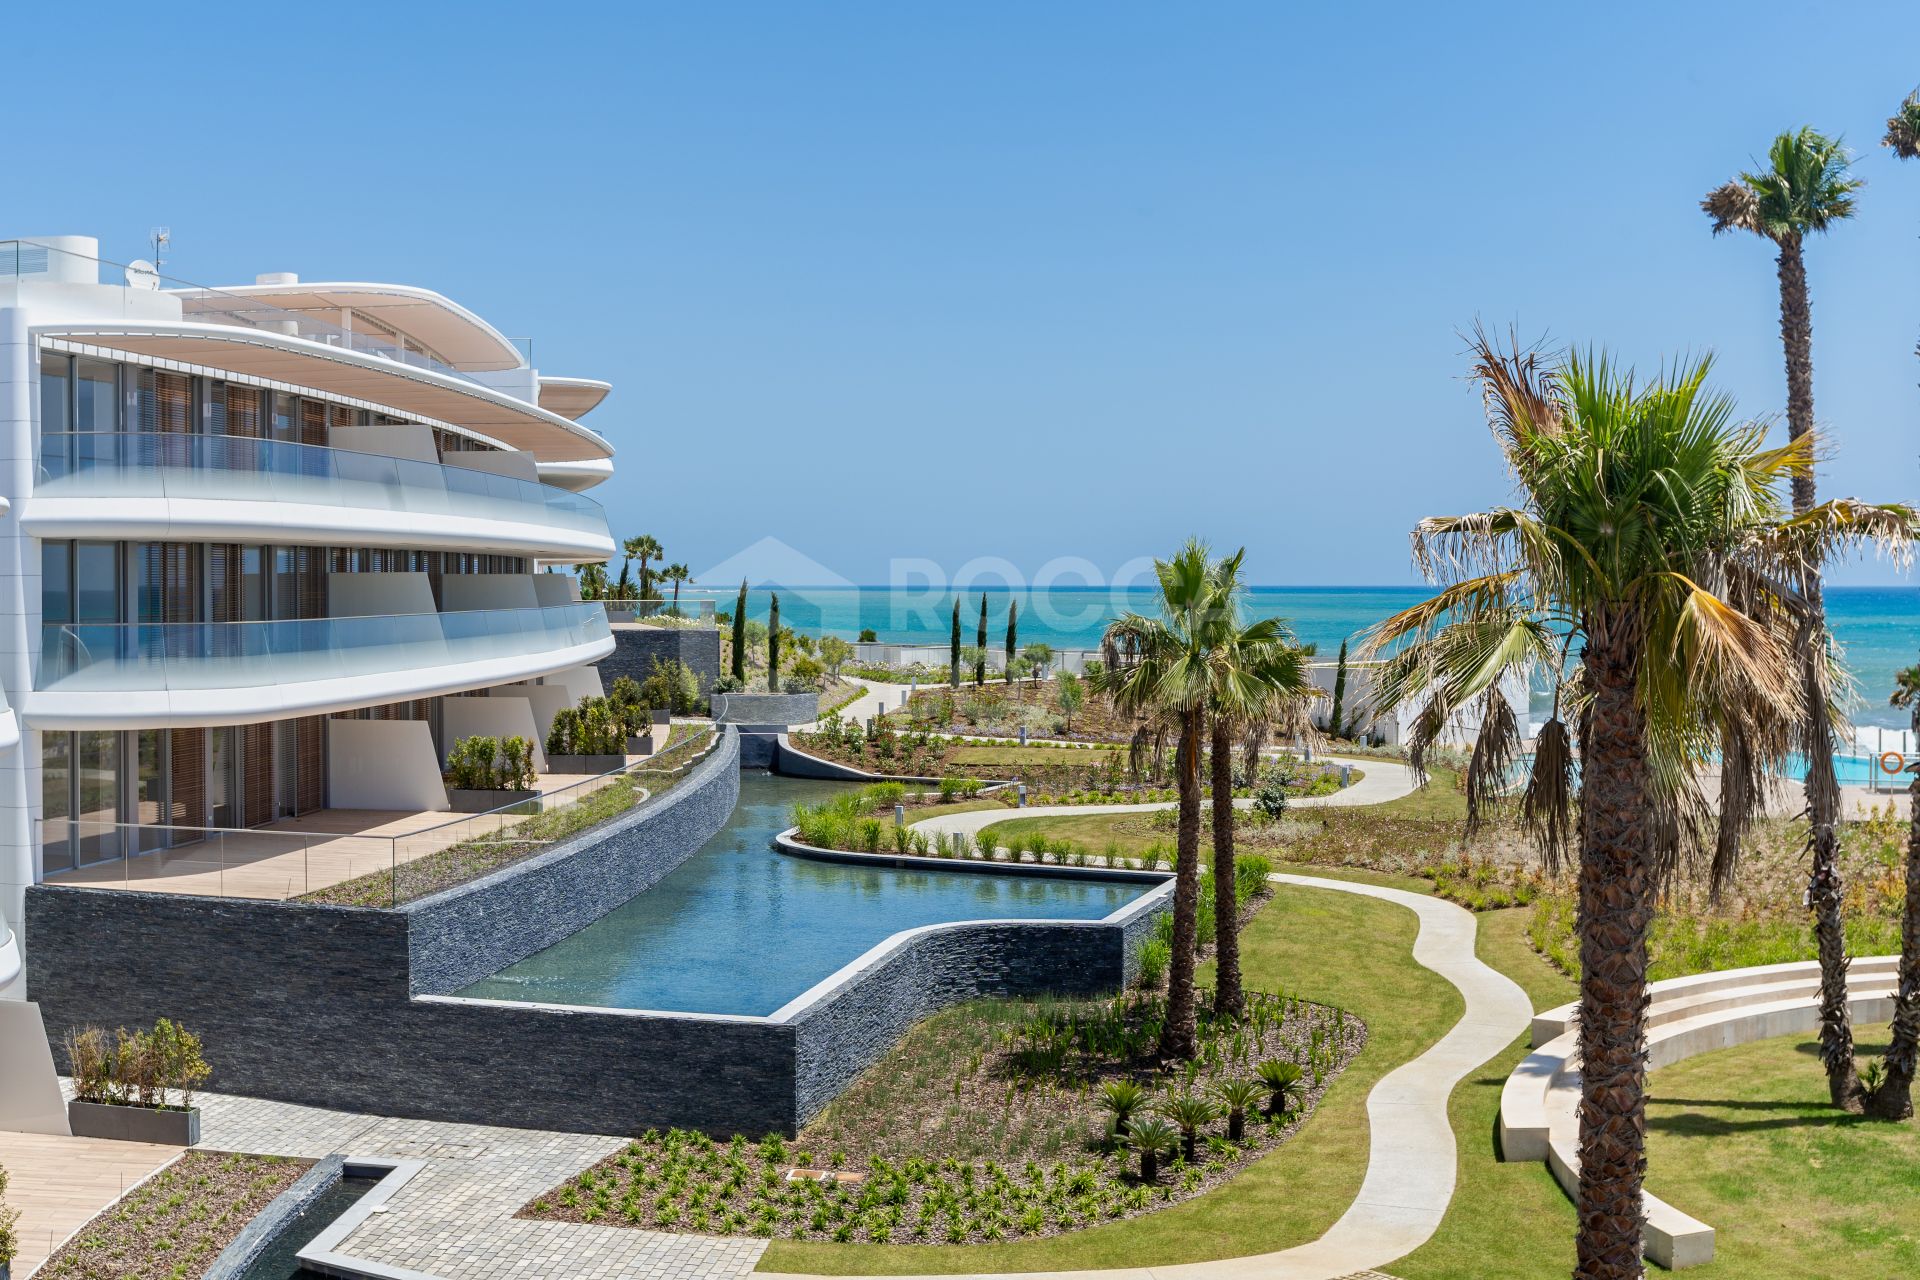 THE EDGE is a privileged project of almost 10.000m2 in a unique beachfront space